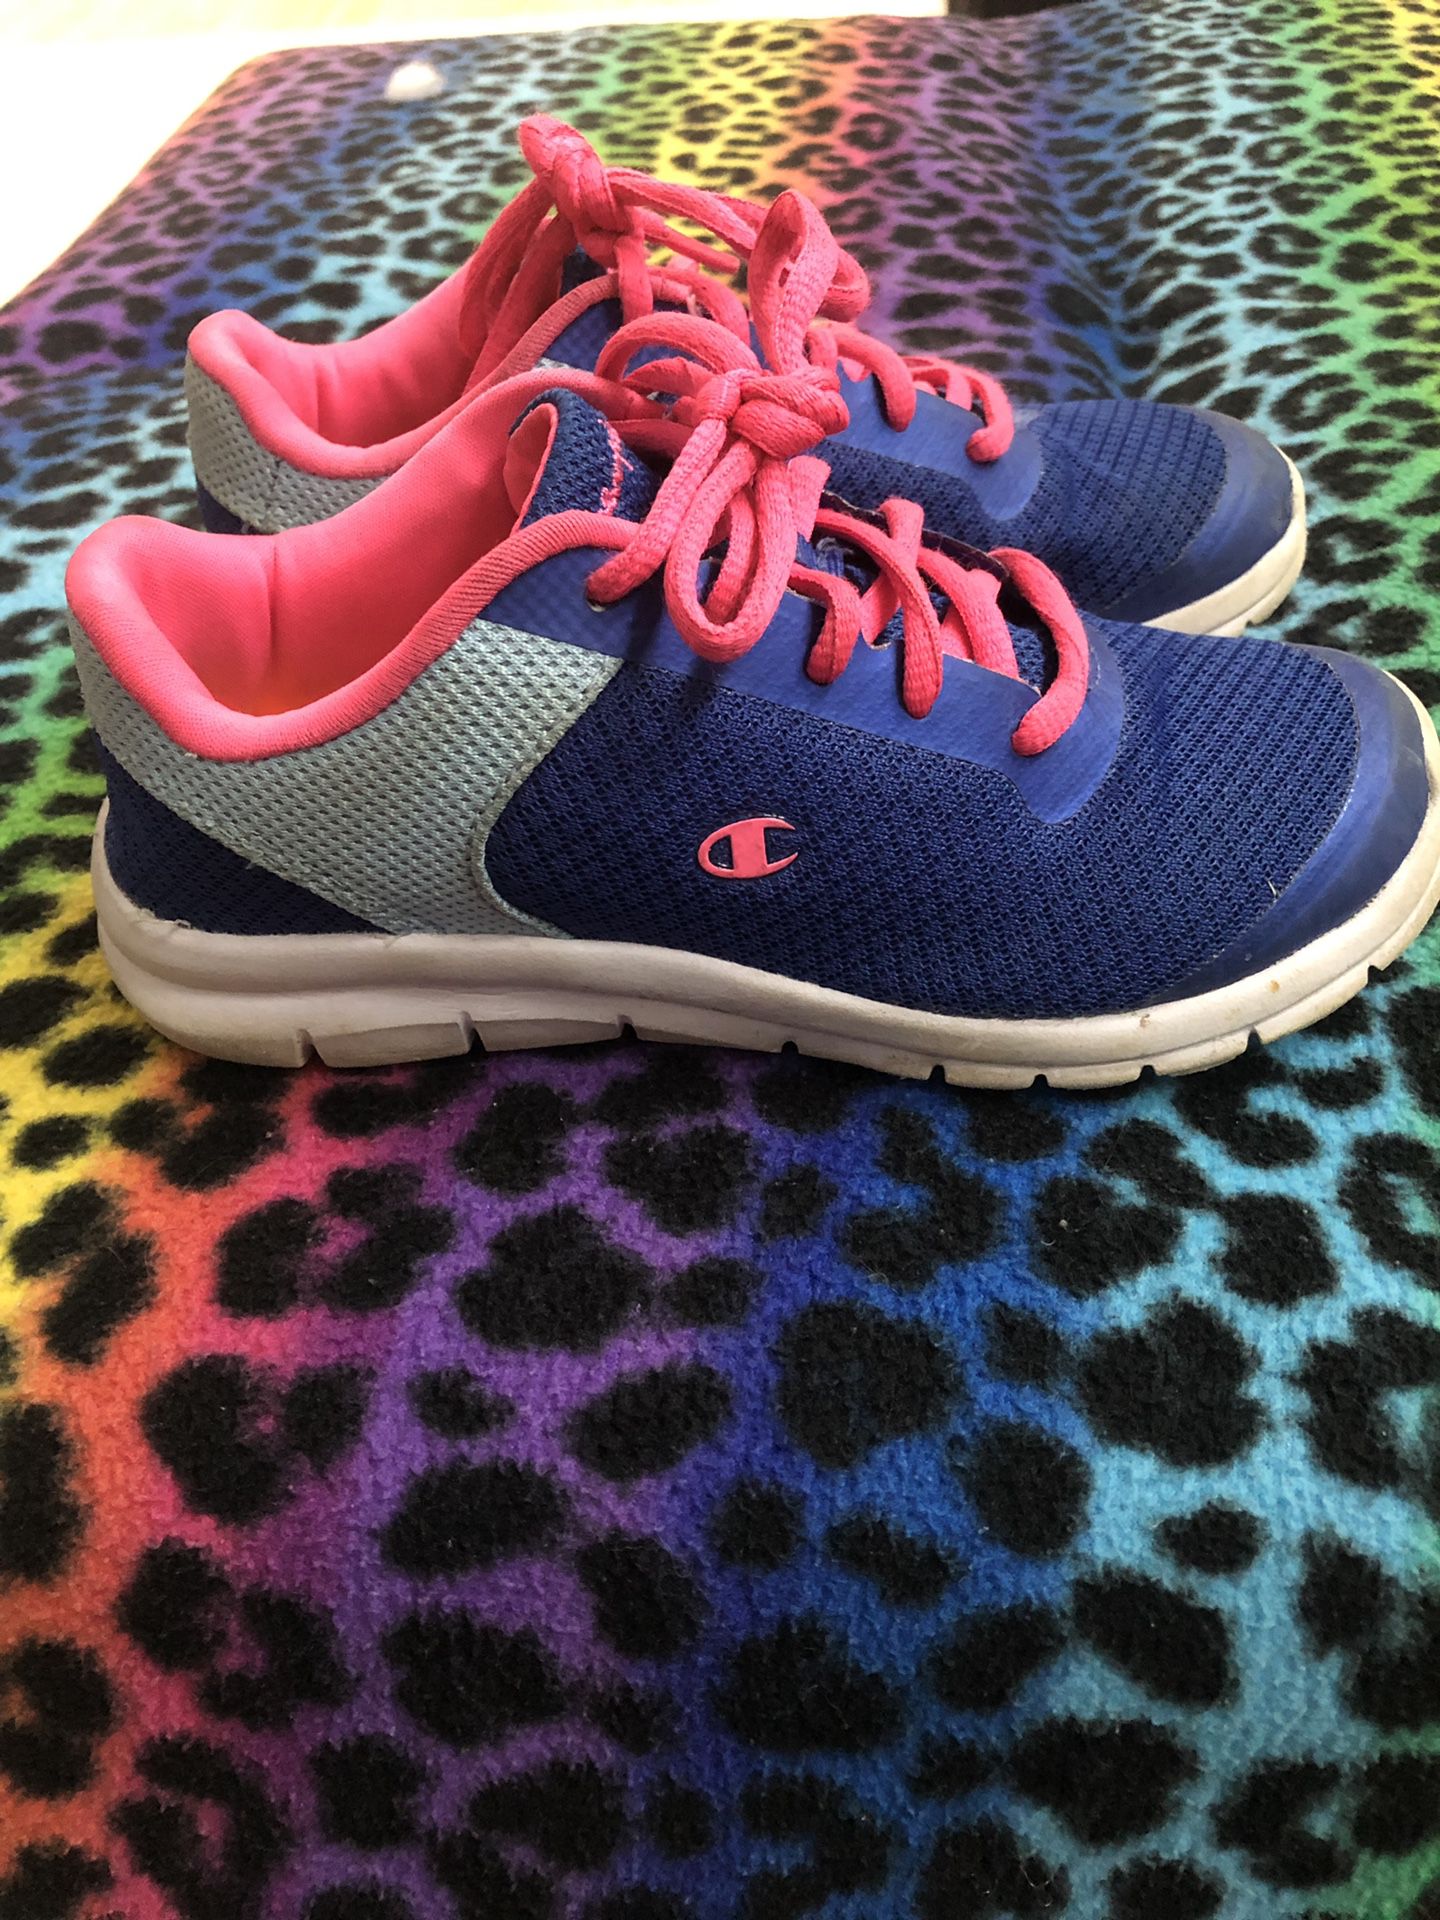 Girls gym shoes